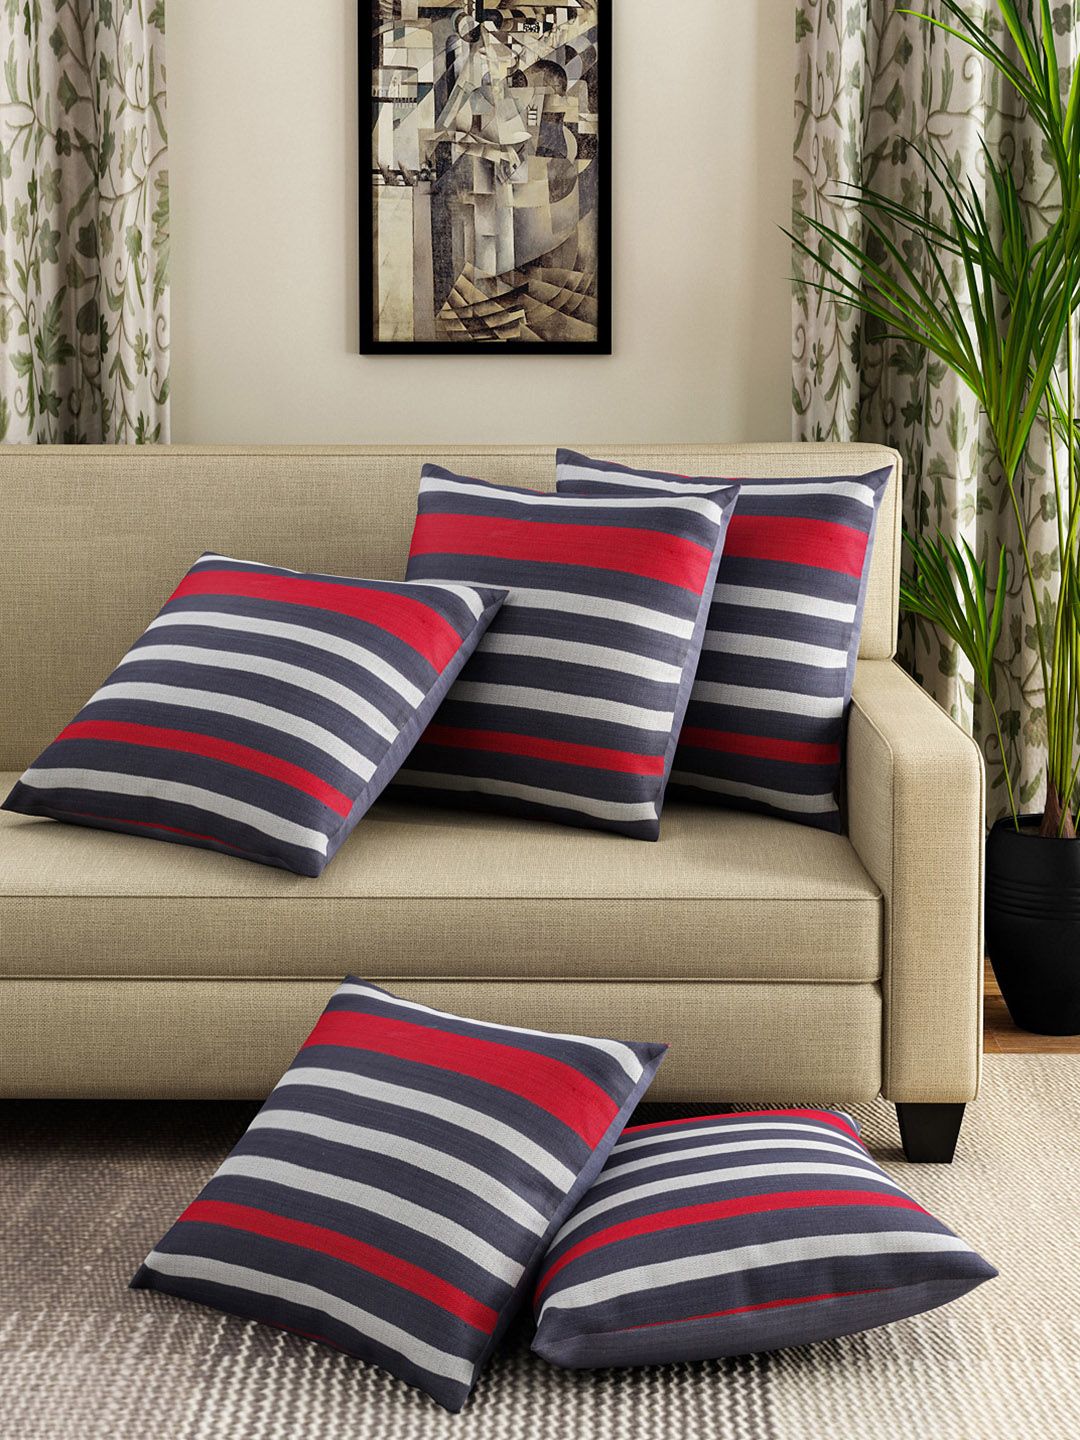 SWAYAM Navy & White Set of 5 Striped 12" x 12" Square Cushion Covers Price in India